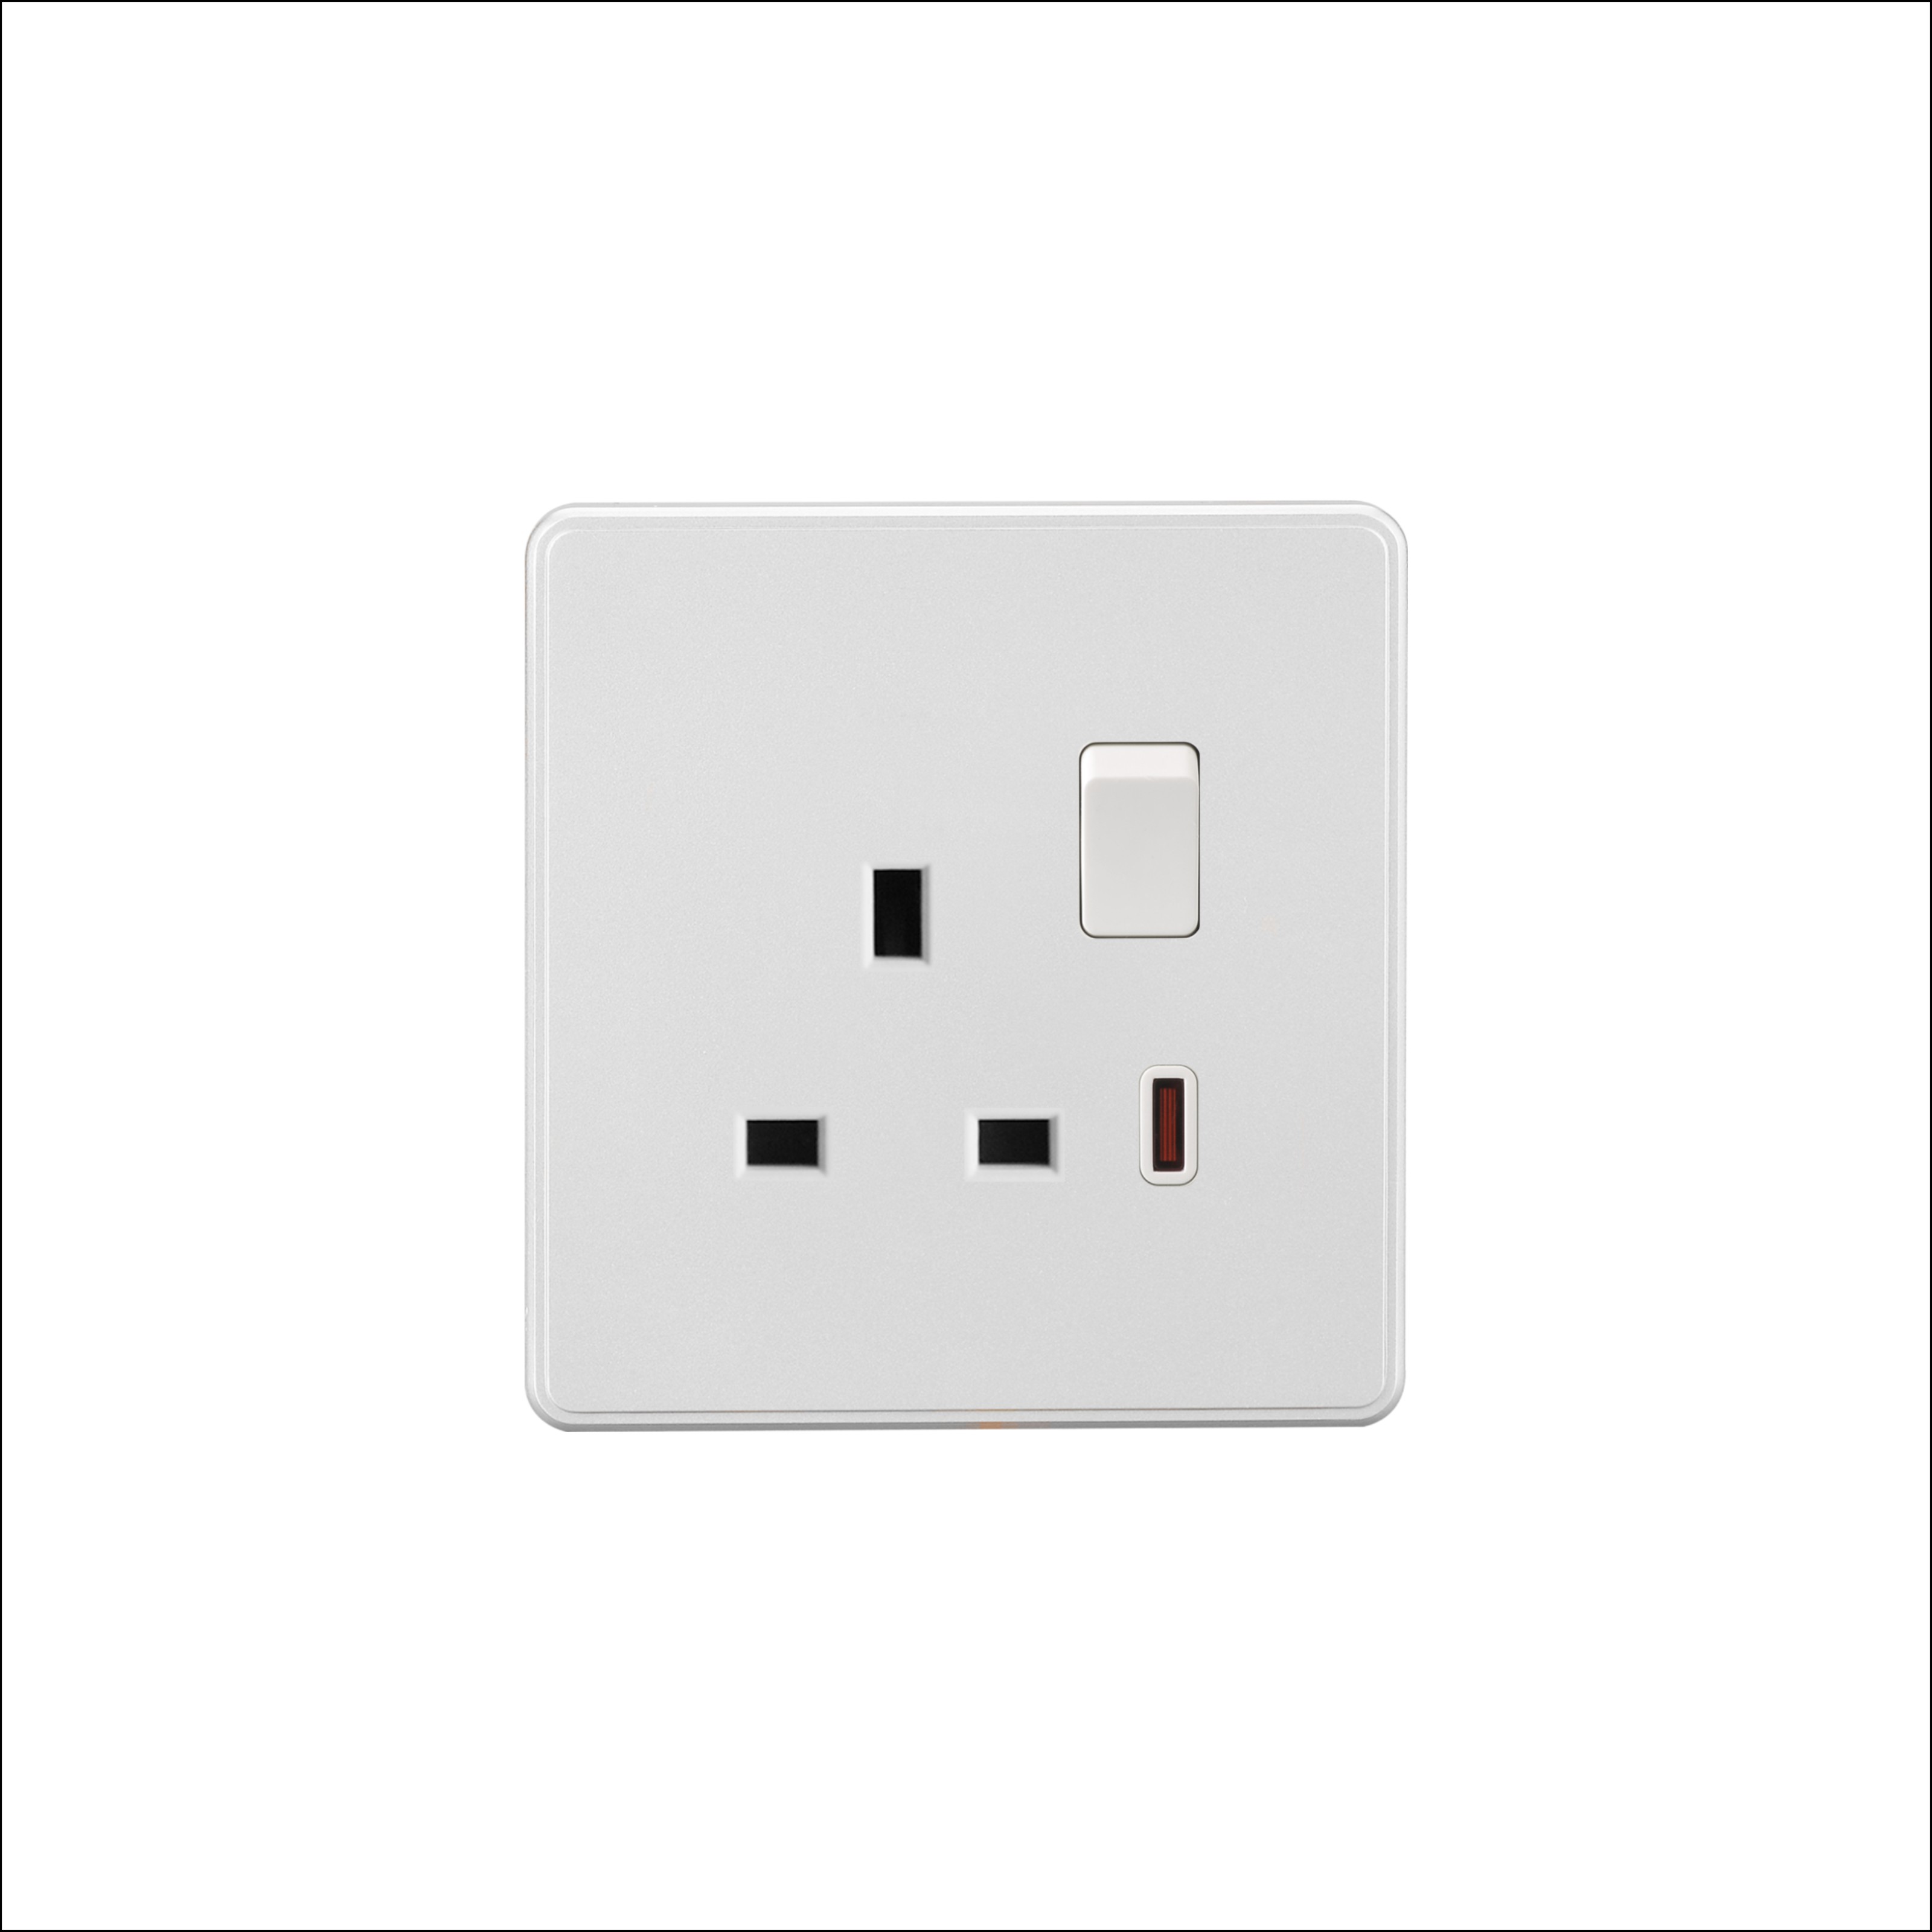 13A switched socket with neon 13A Featured Image